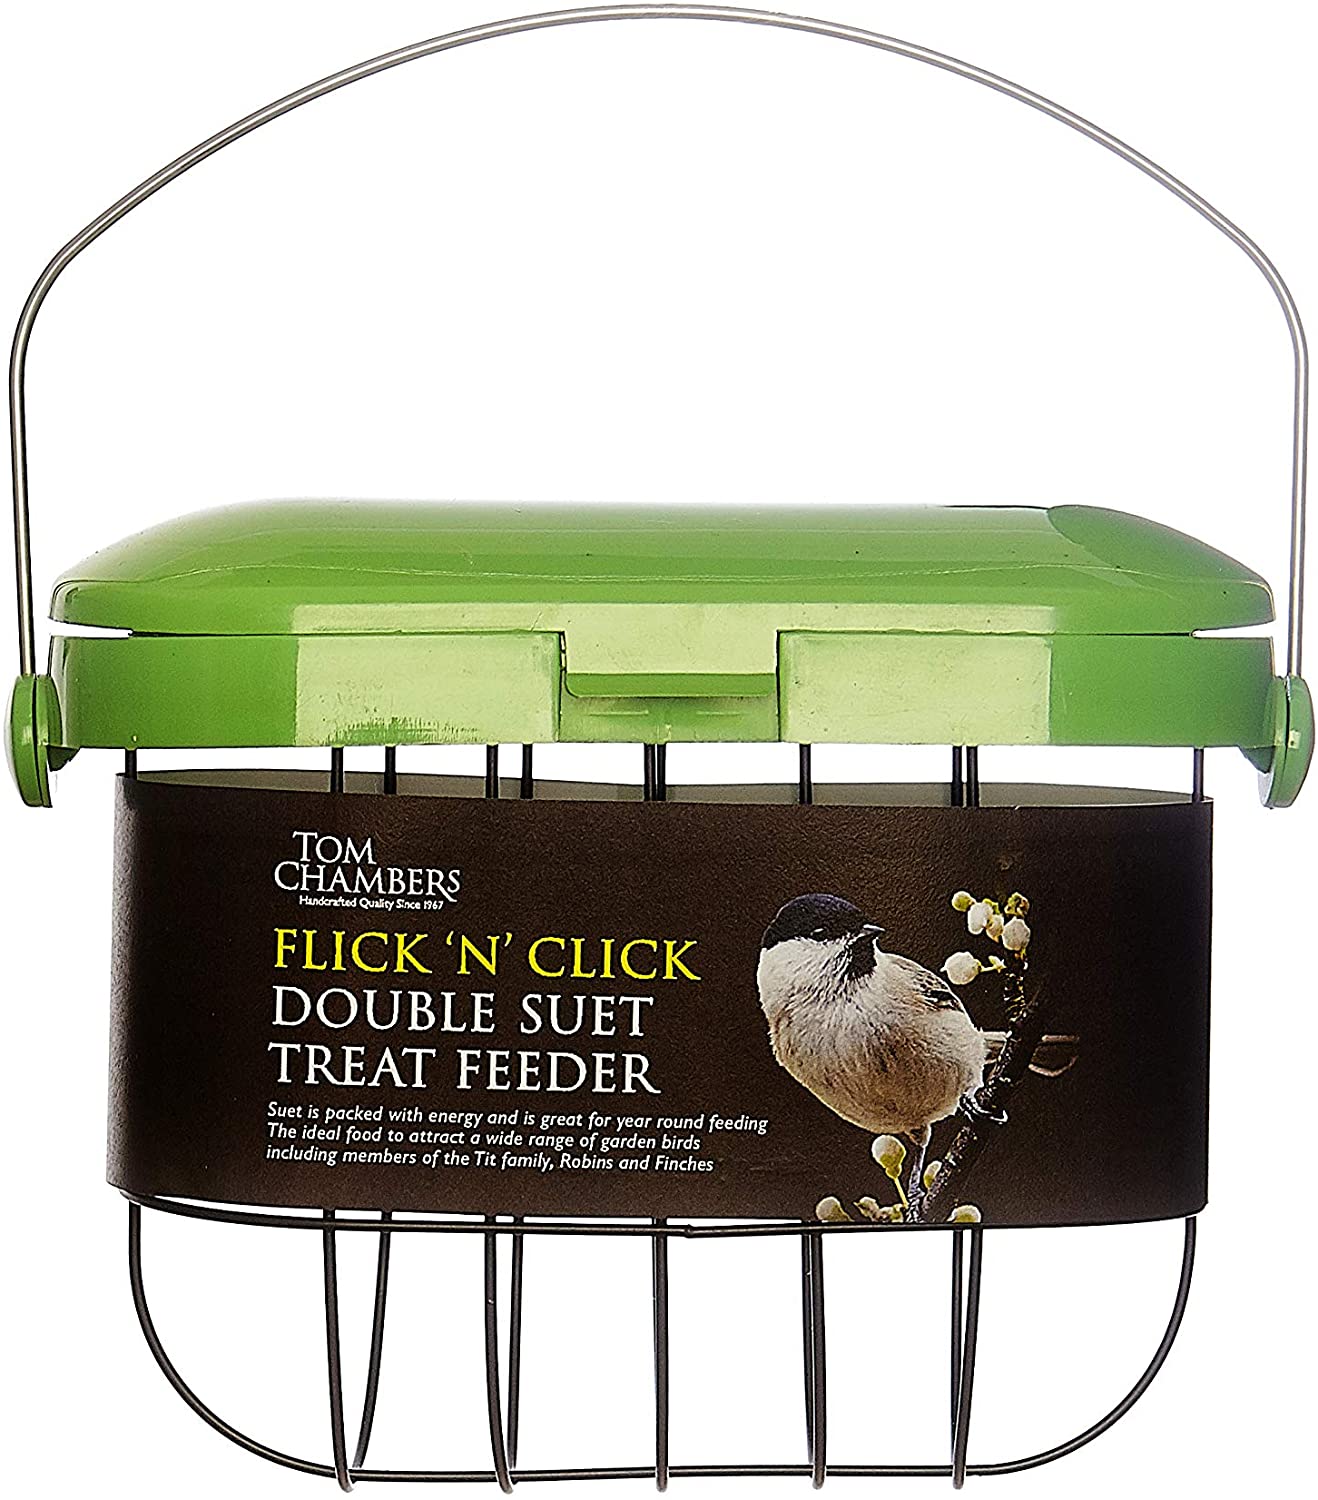 Tom Chambers Flick 'n' Click Double Suet Treat Feeder FBS016